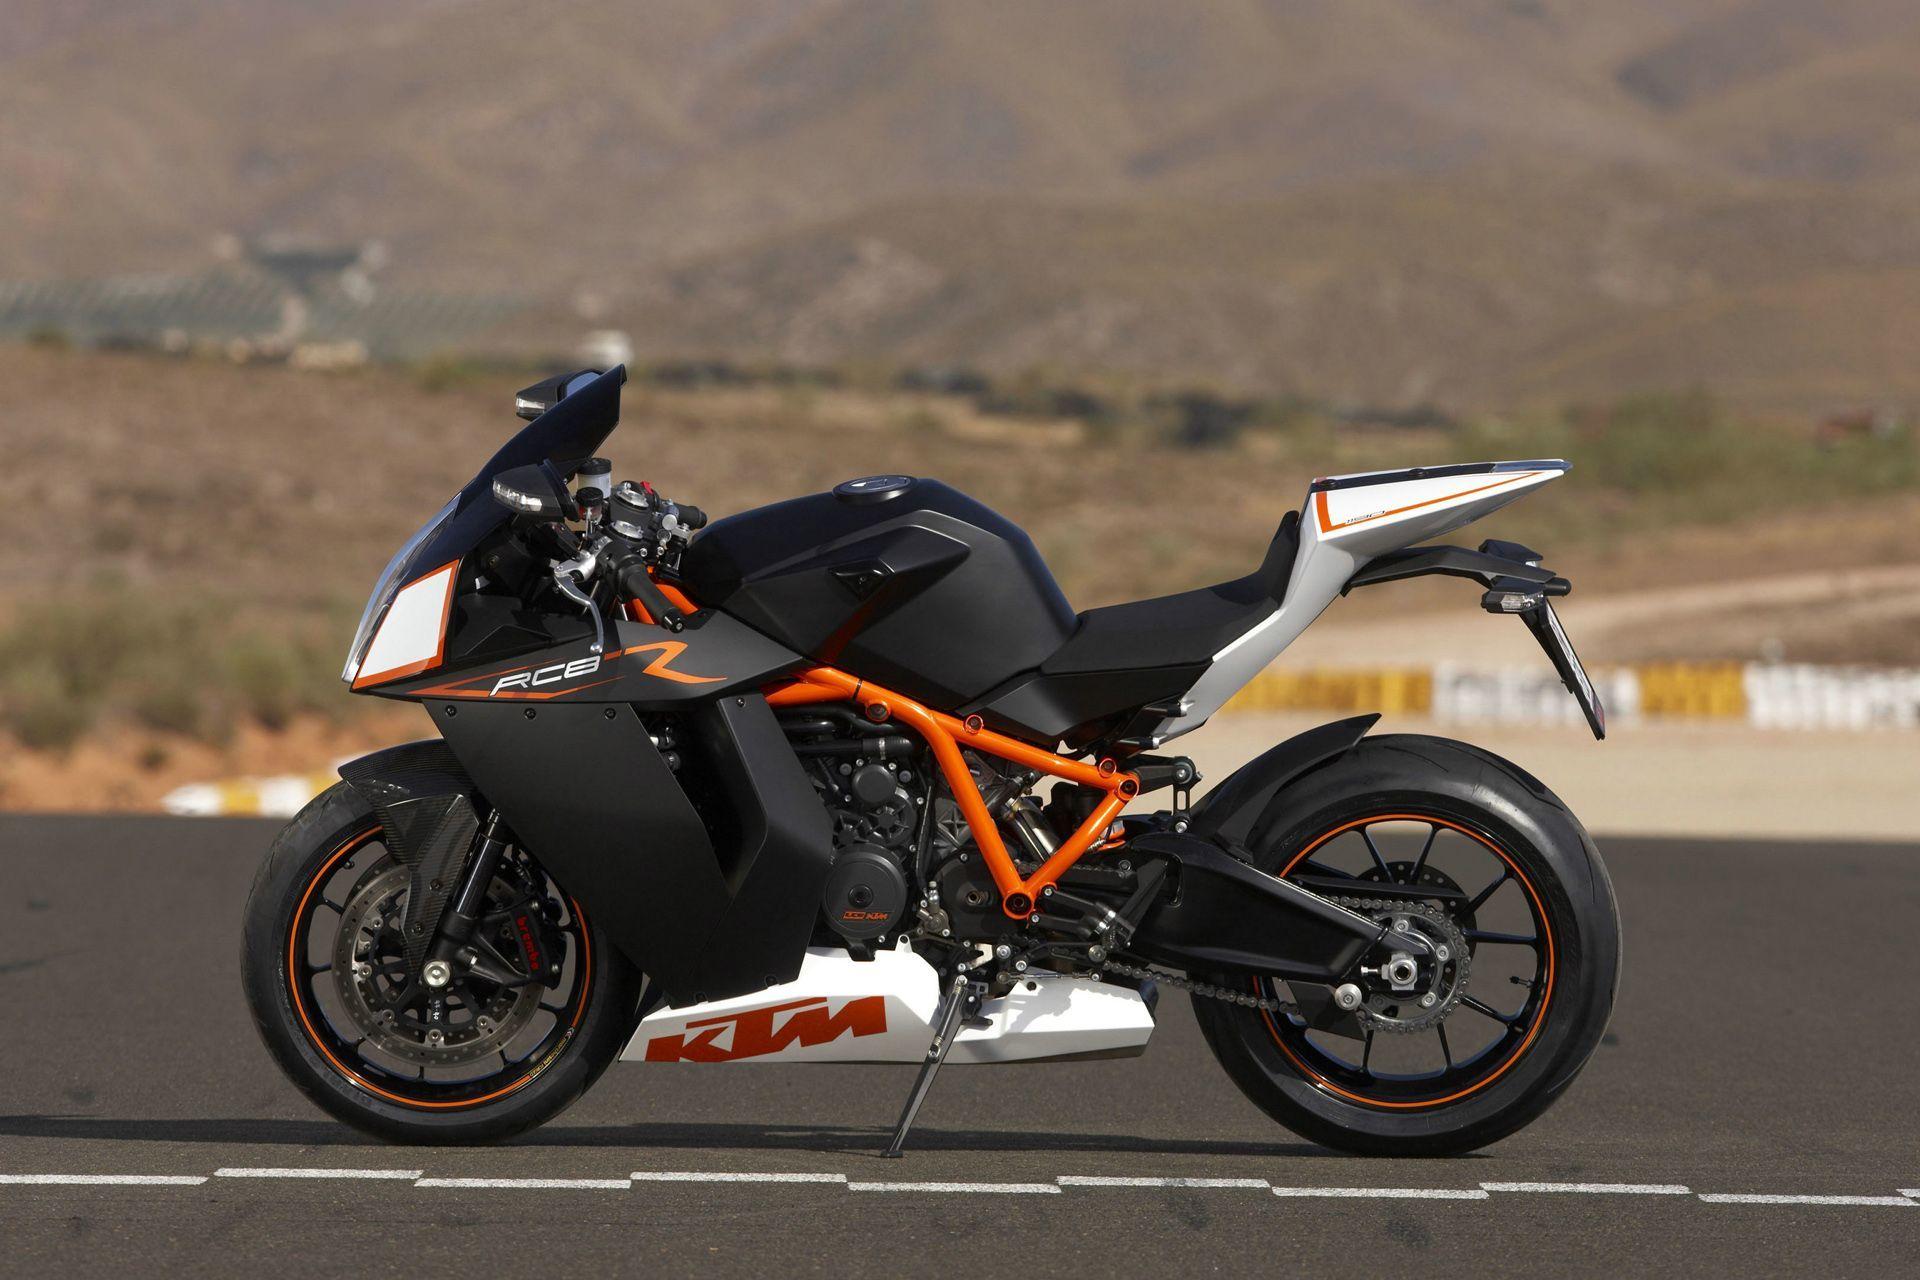 Download the KTM 11900 RC8 R Heated Wallpaper, KTM 11900 RC8 R